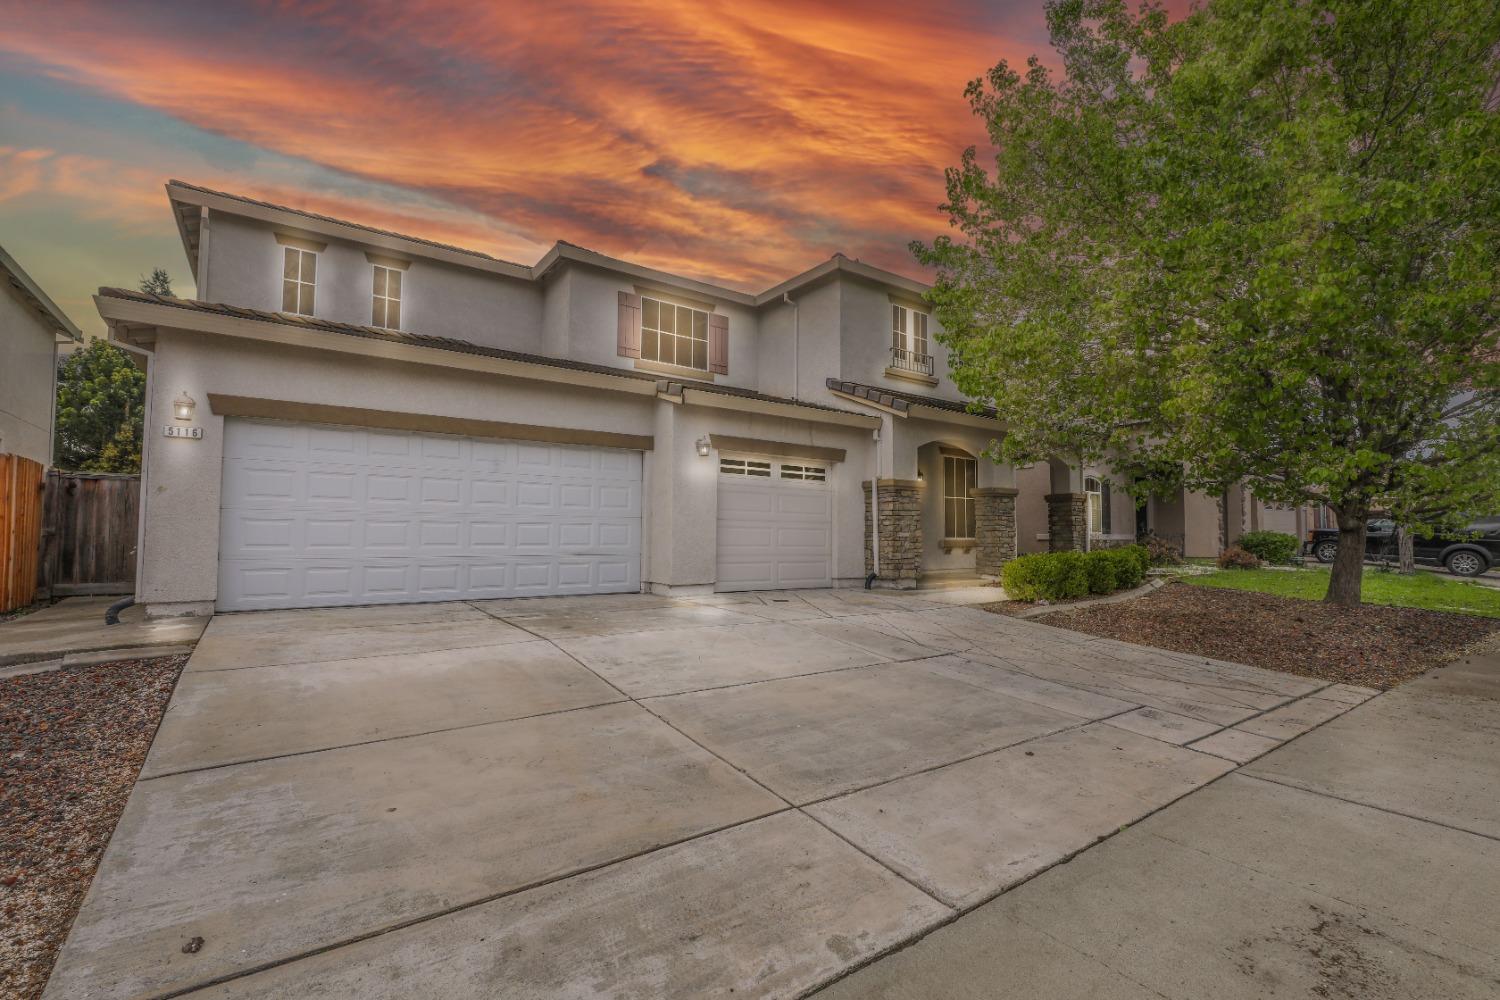 Step into luxury living with this spacious 5-bedroom, 3-bathroom home in Elk Grove, CA. Spanning 314